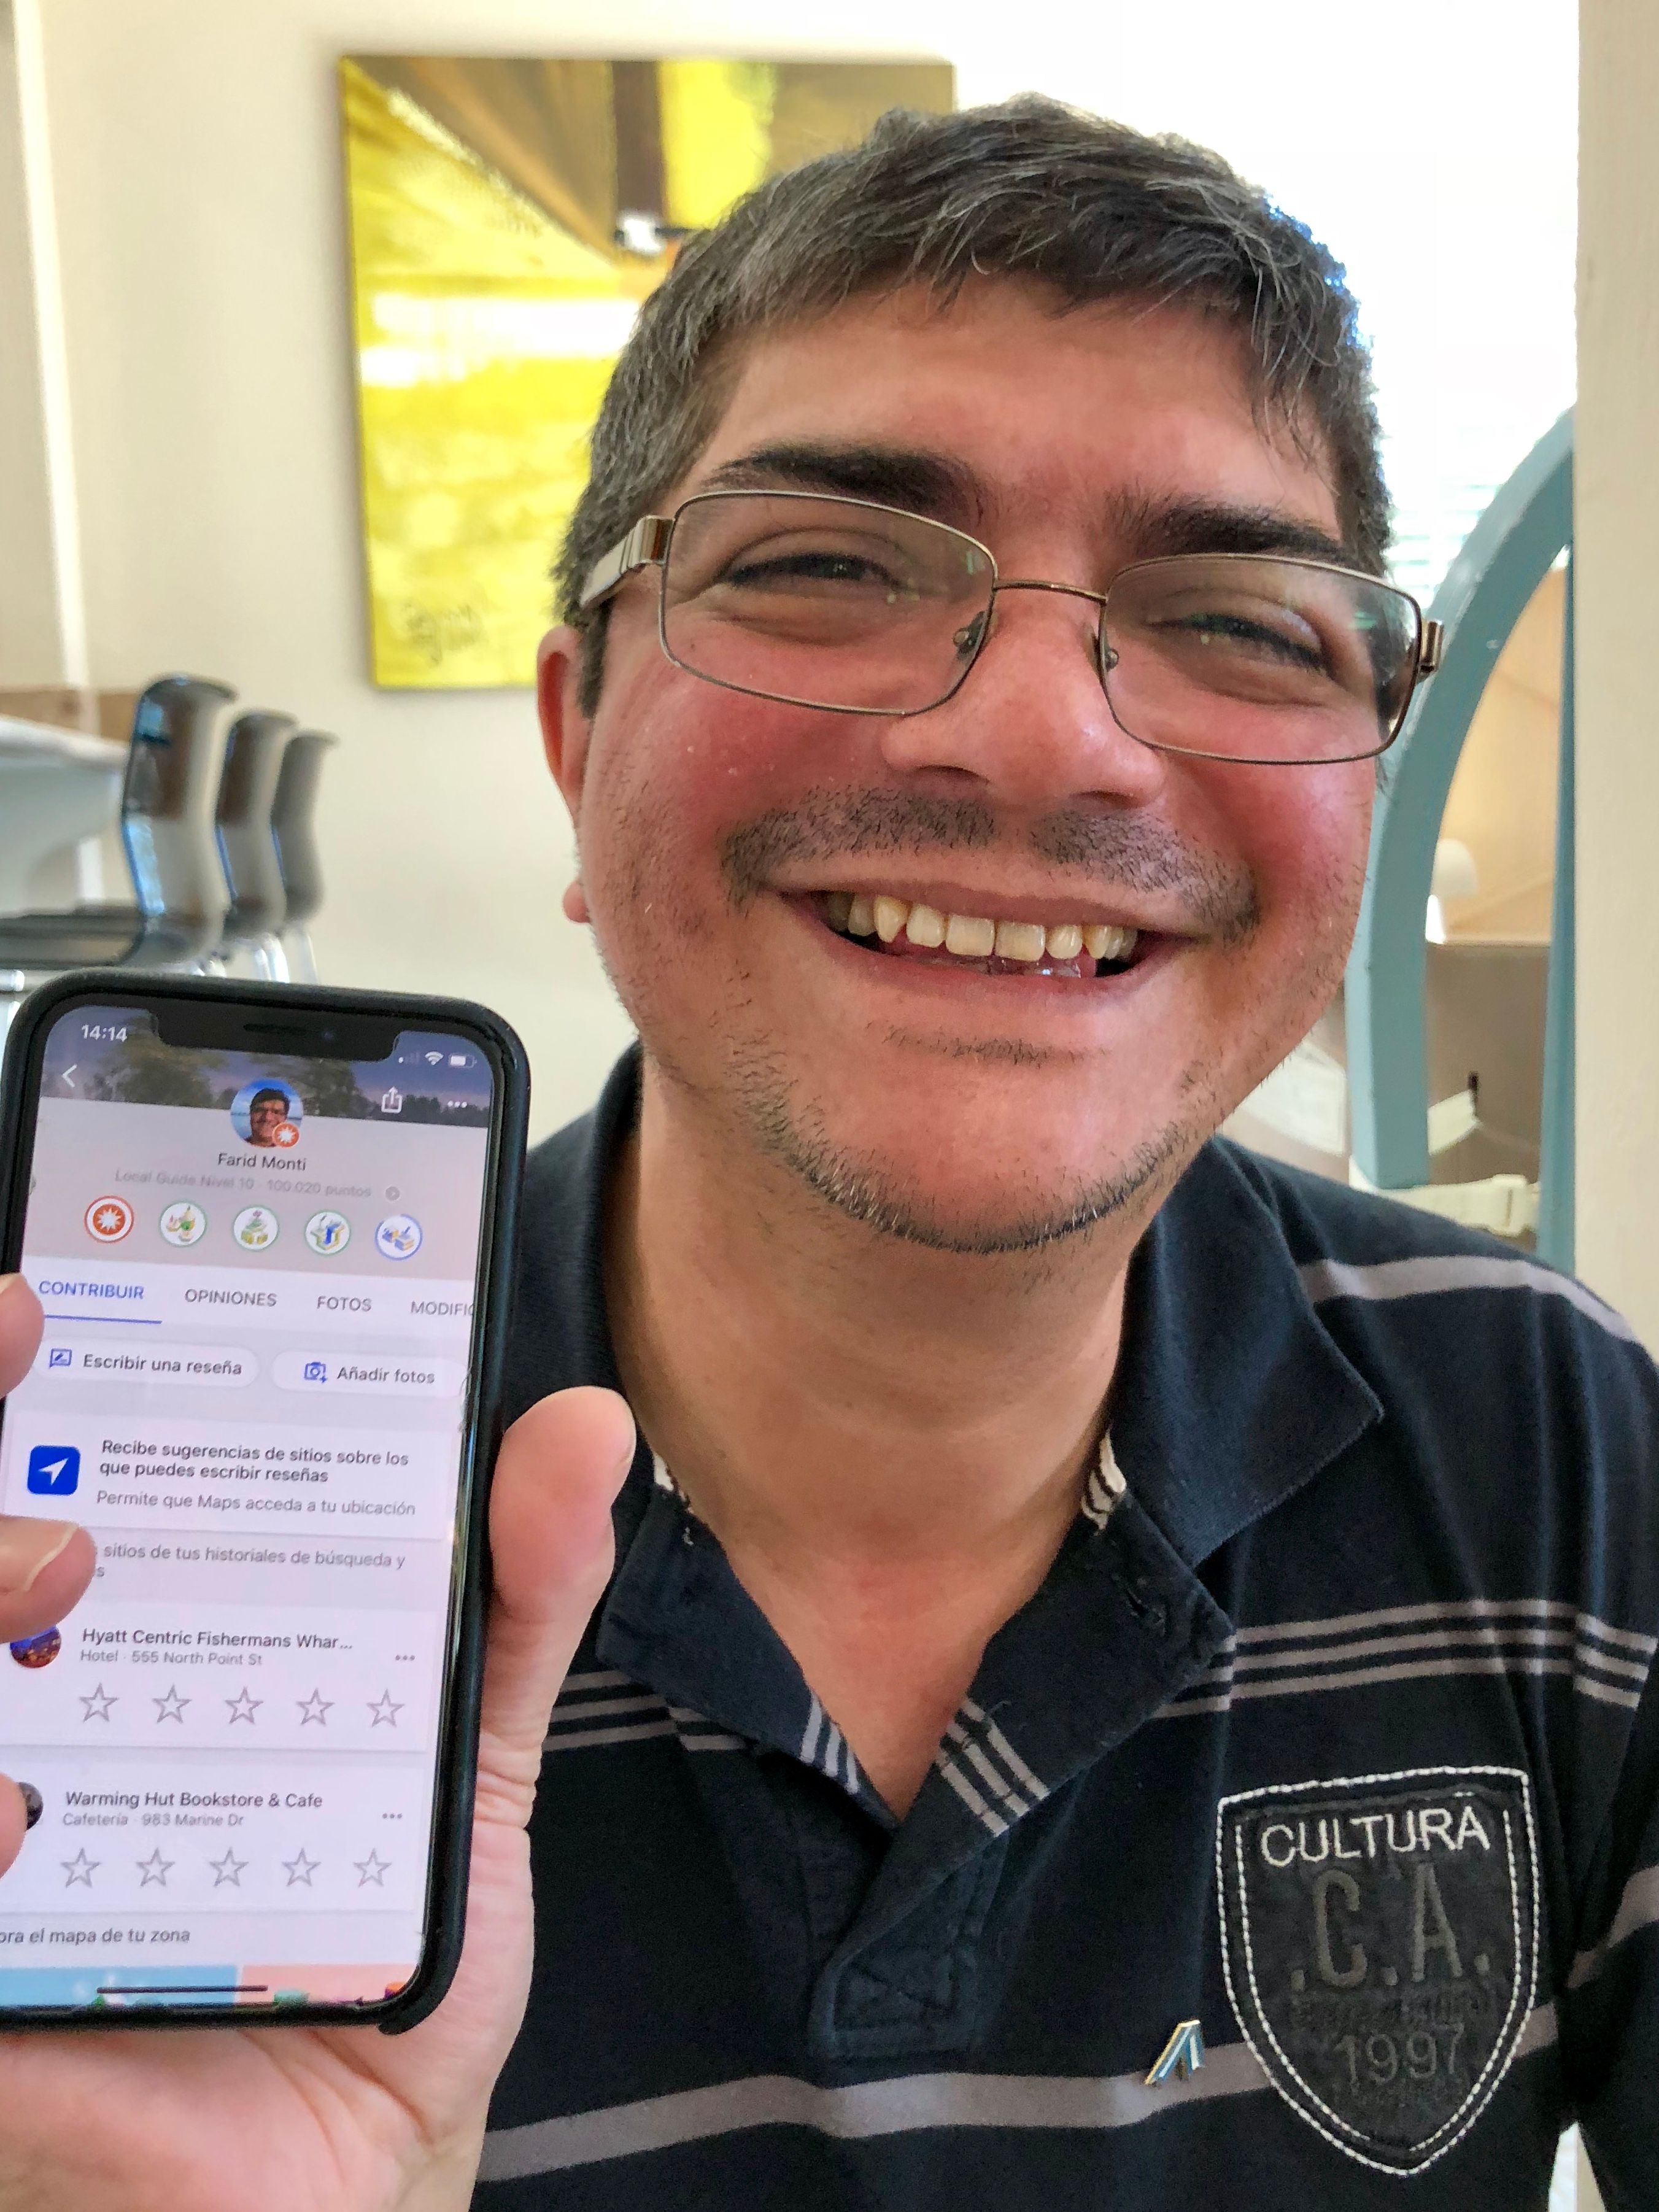 Reaching Level 10 during his time during Connect Live 2018 @faridmonti proudly showing his new Local Guides status